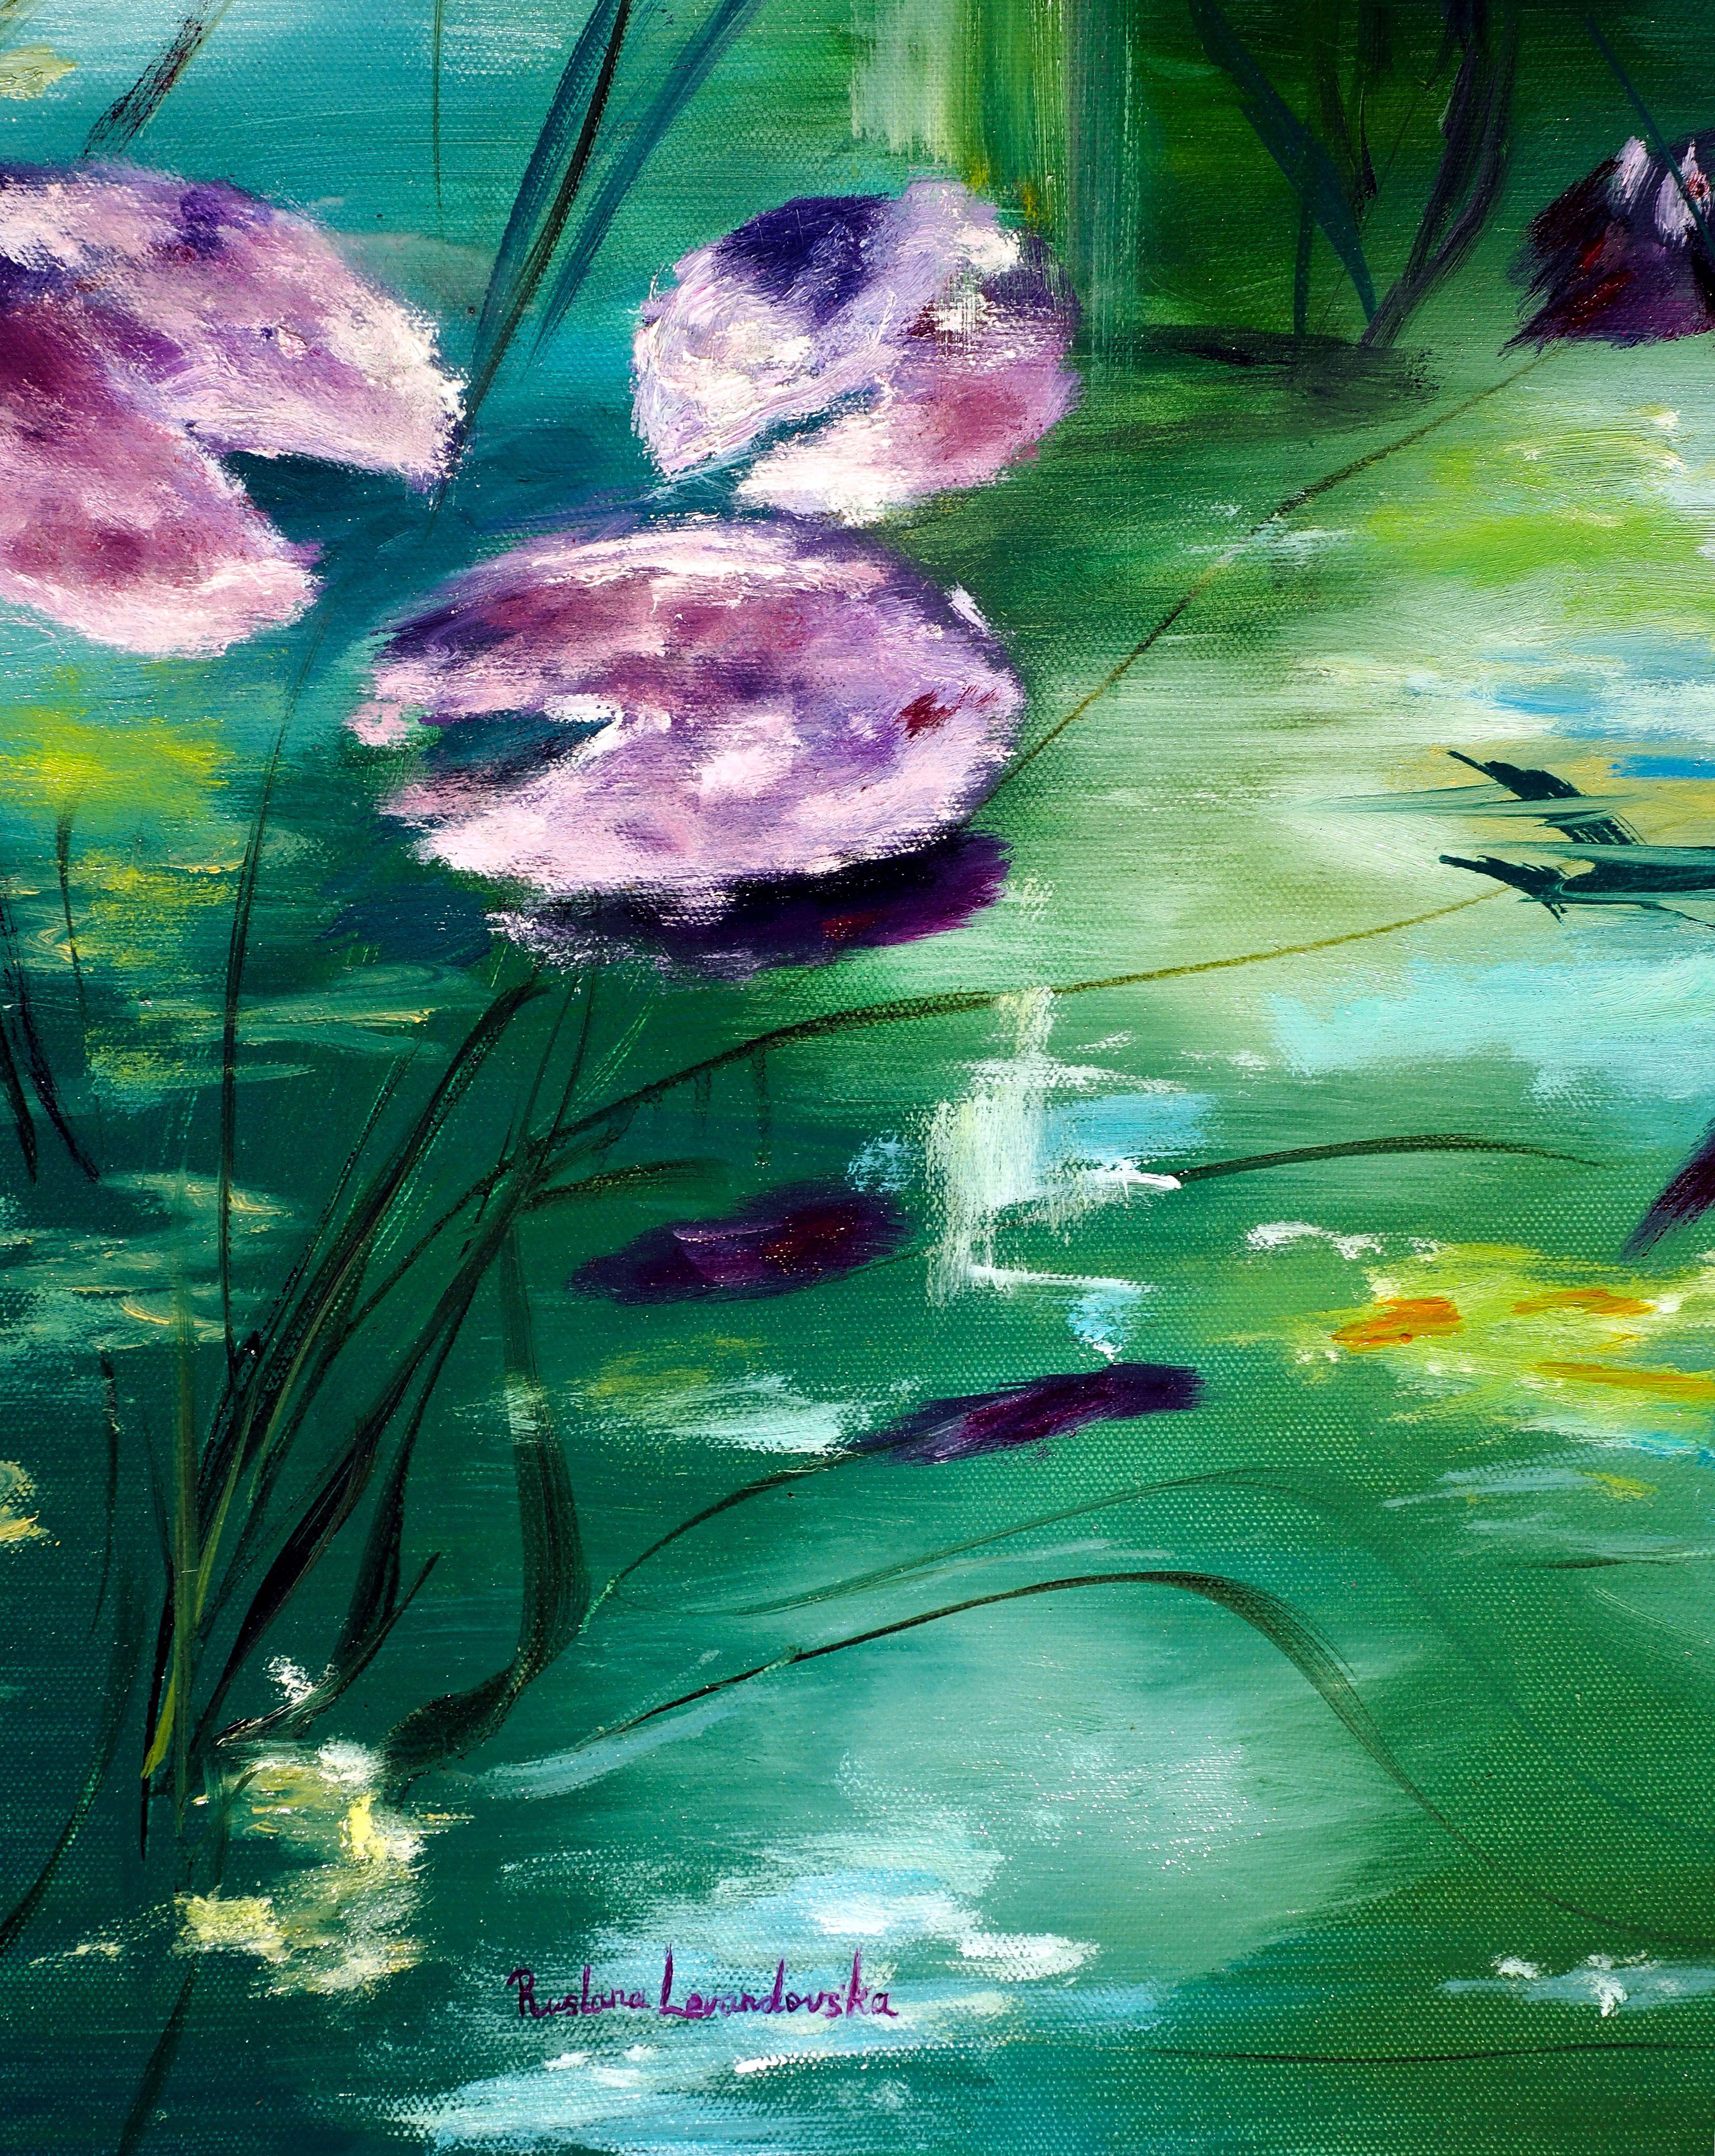 Monet's Pond, Painting, Oil on Canvas 1